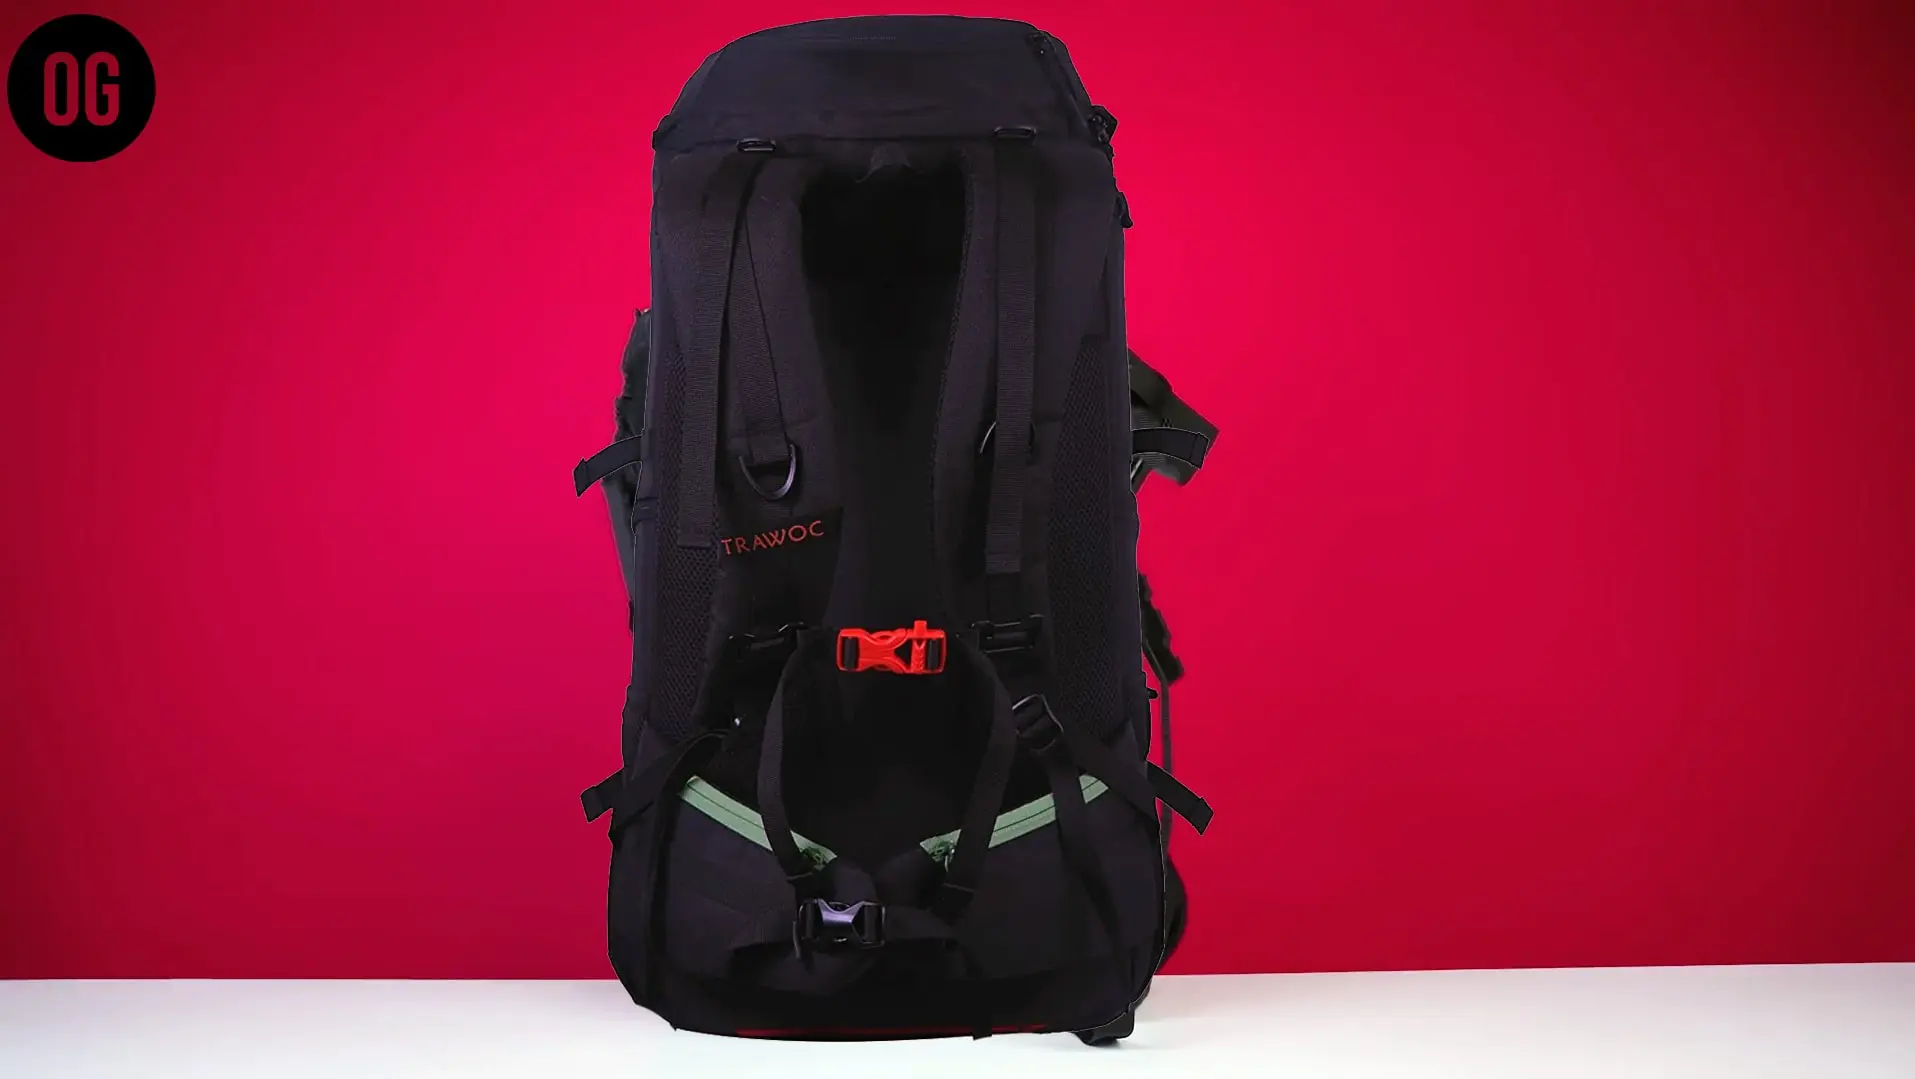 Trawoc SHK 50 Backpack Review